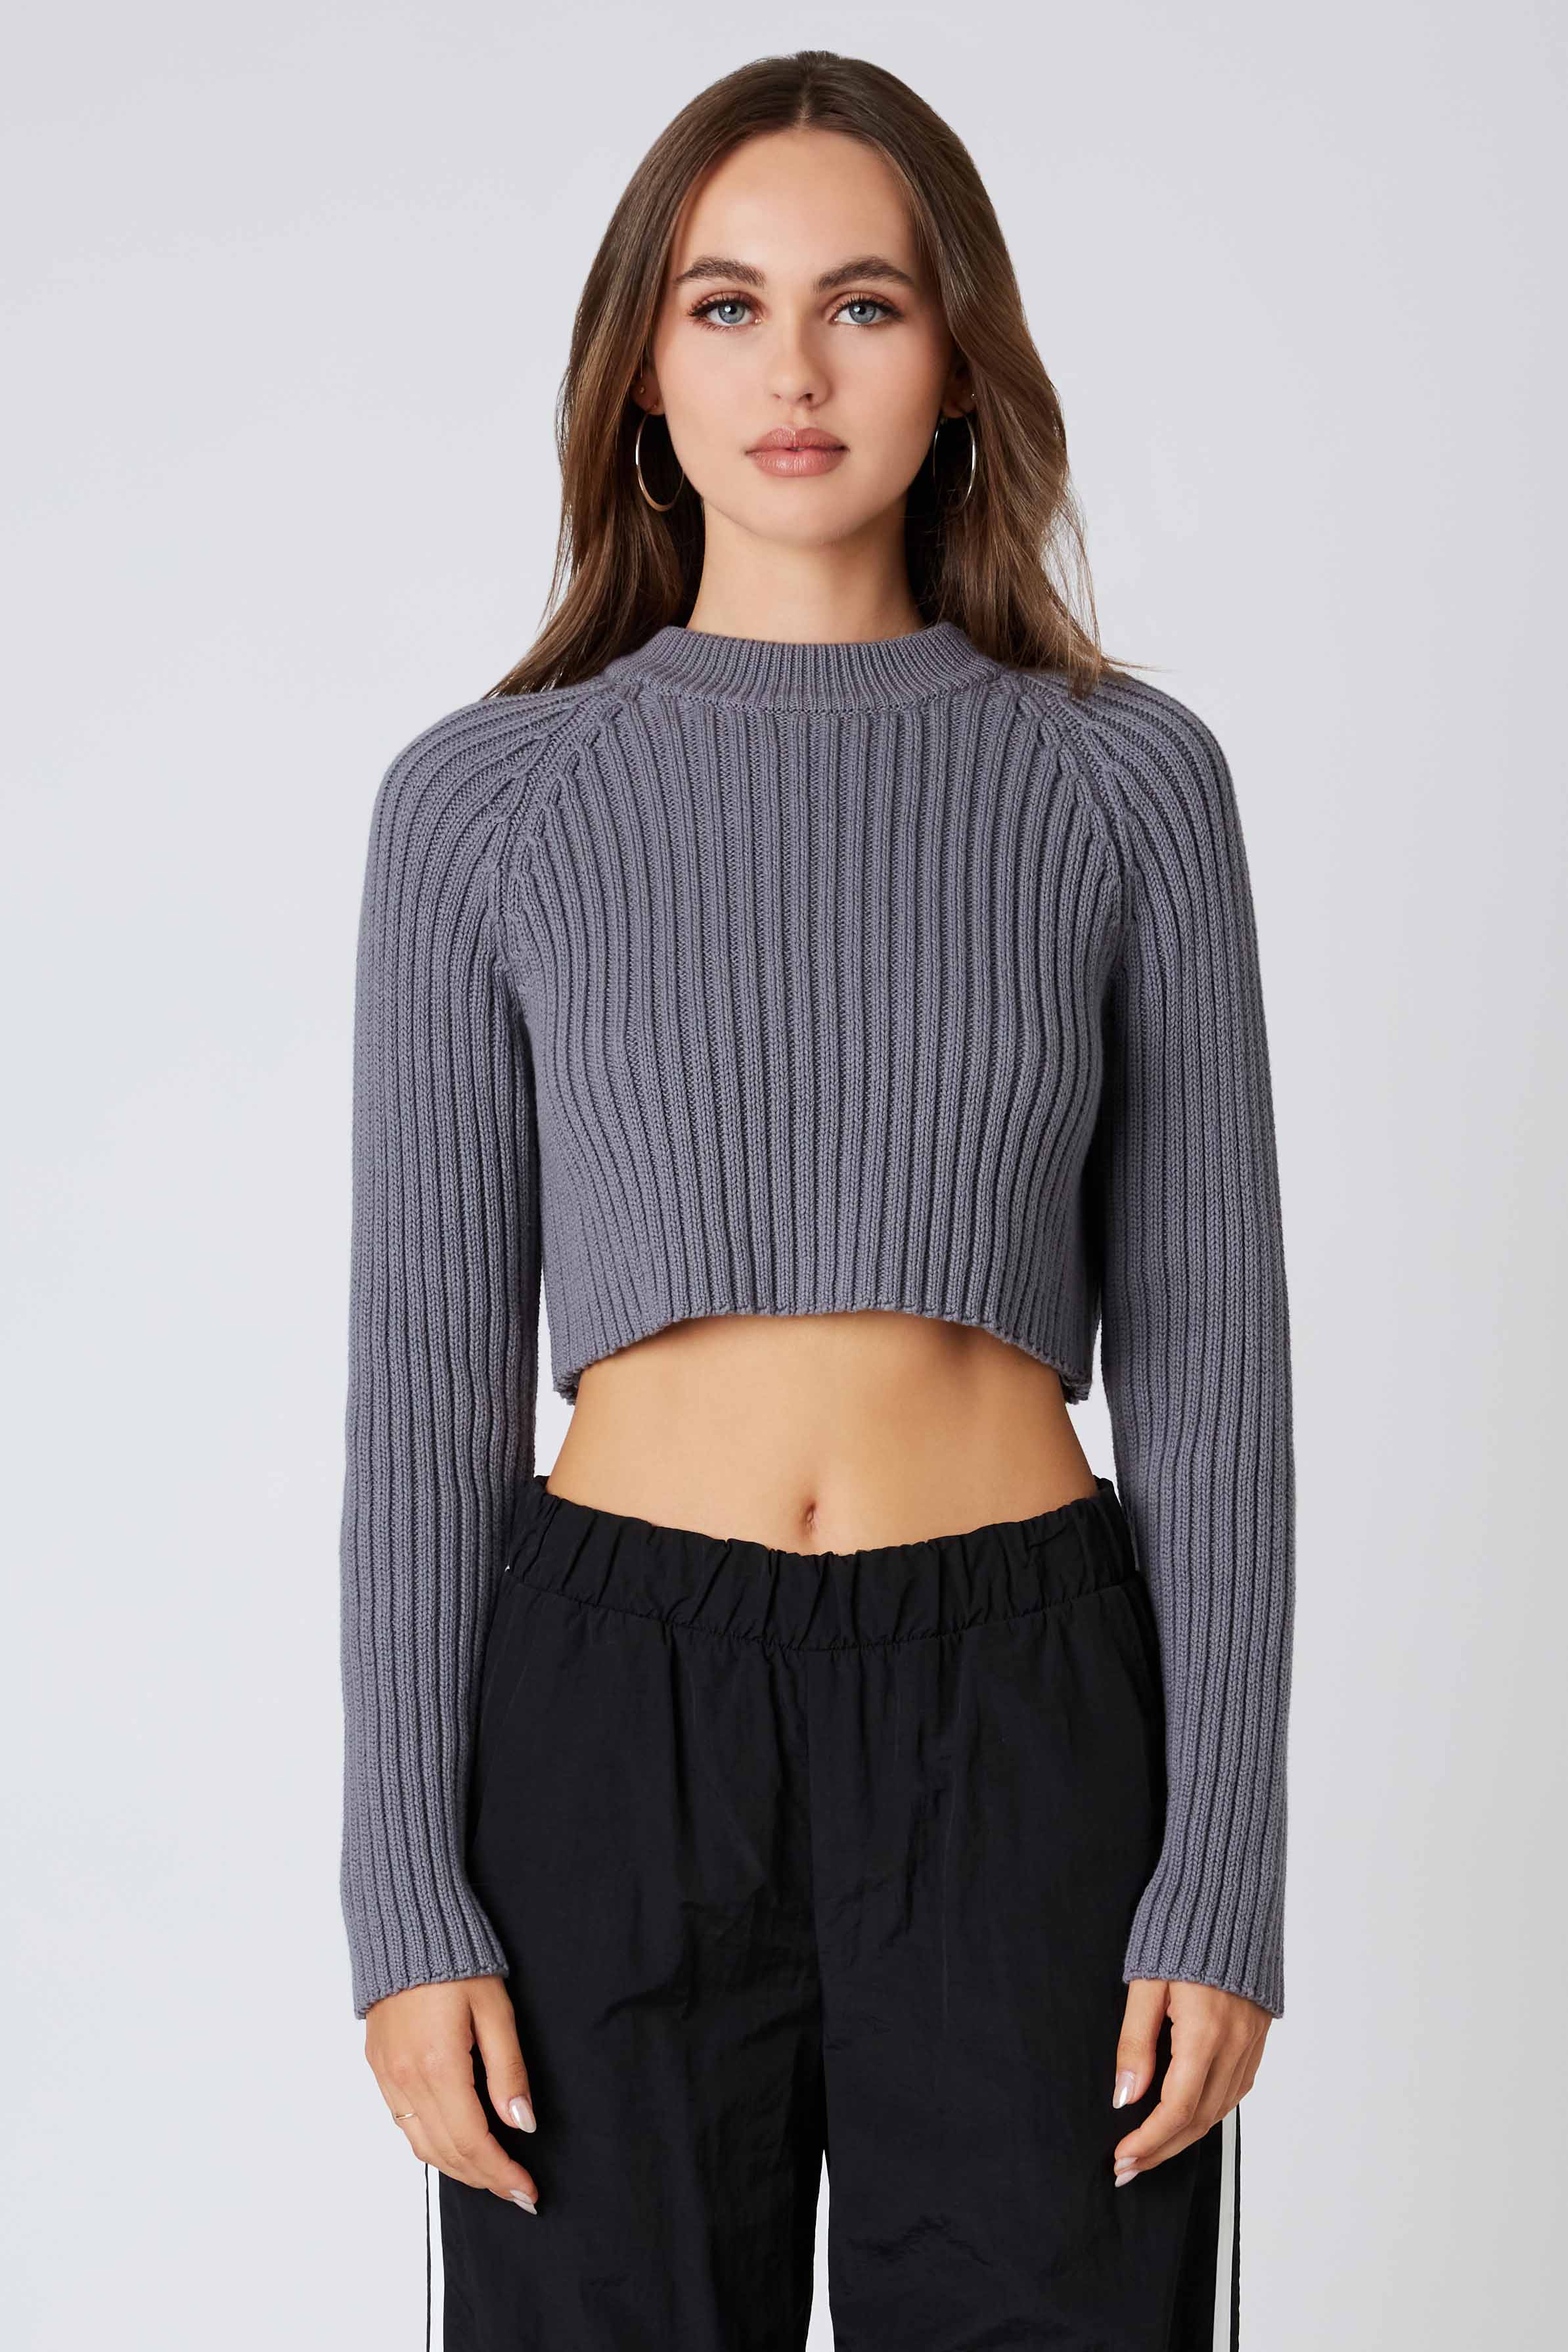 Knit Cropped Sweater Top in Pewter Front View